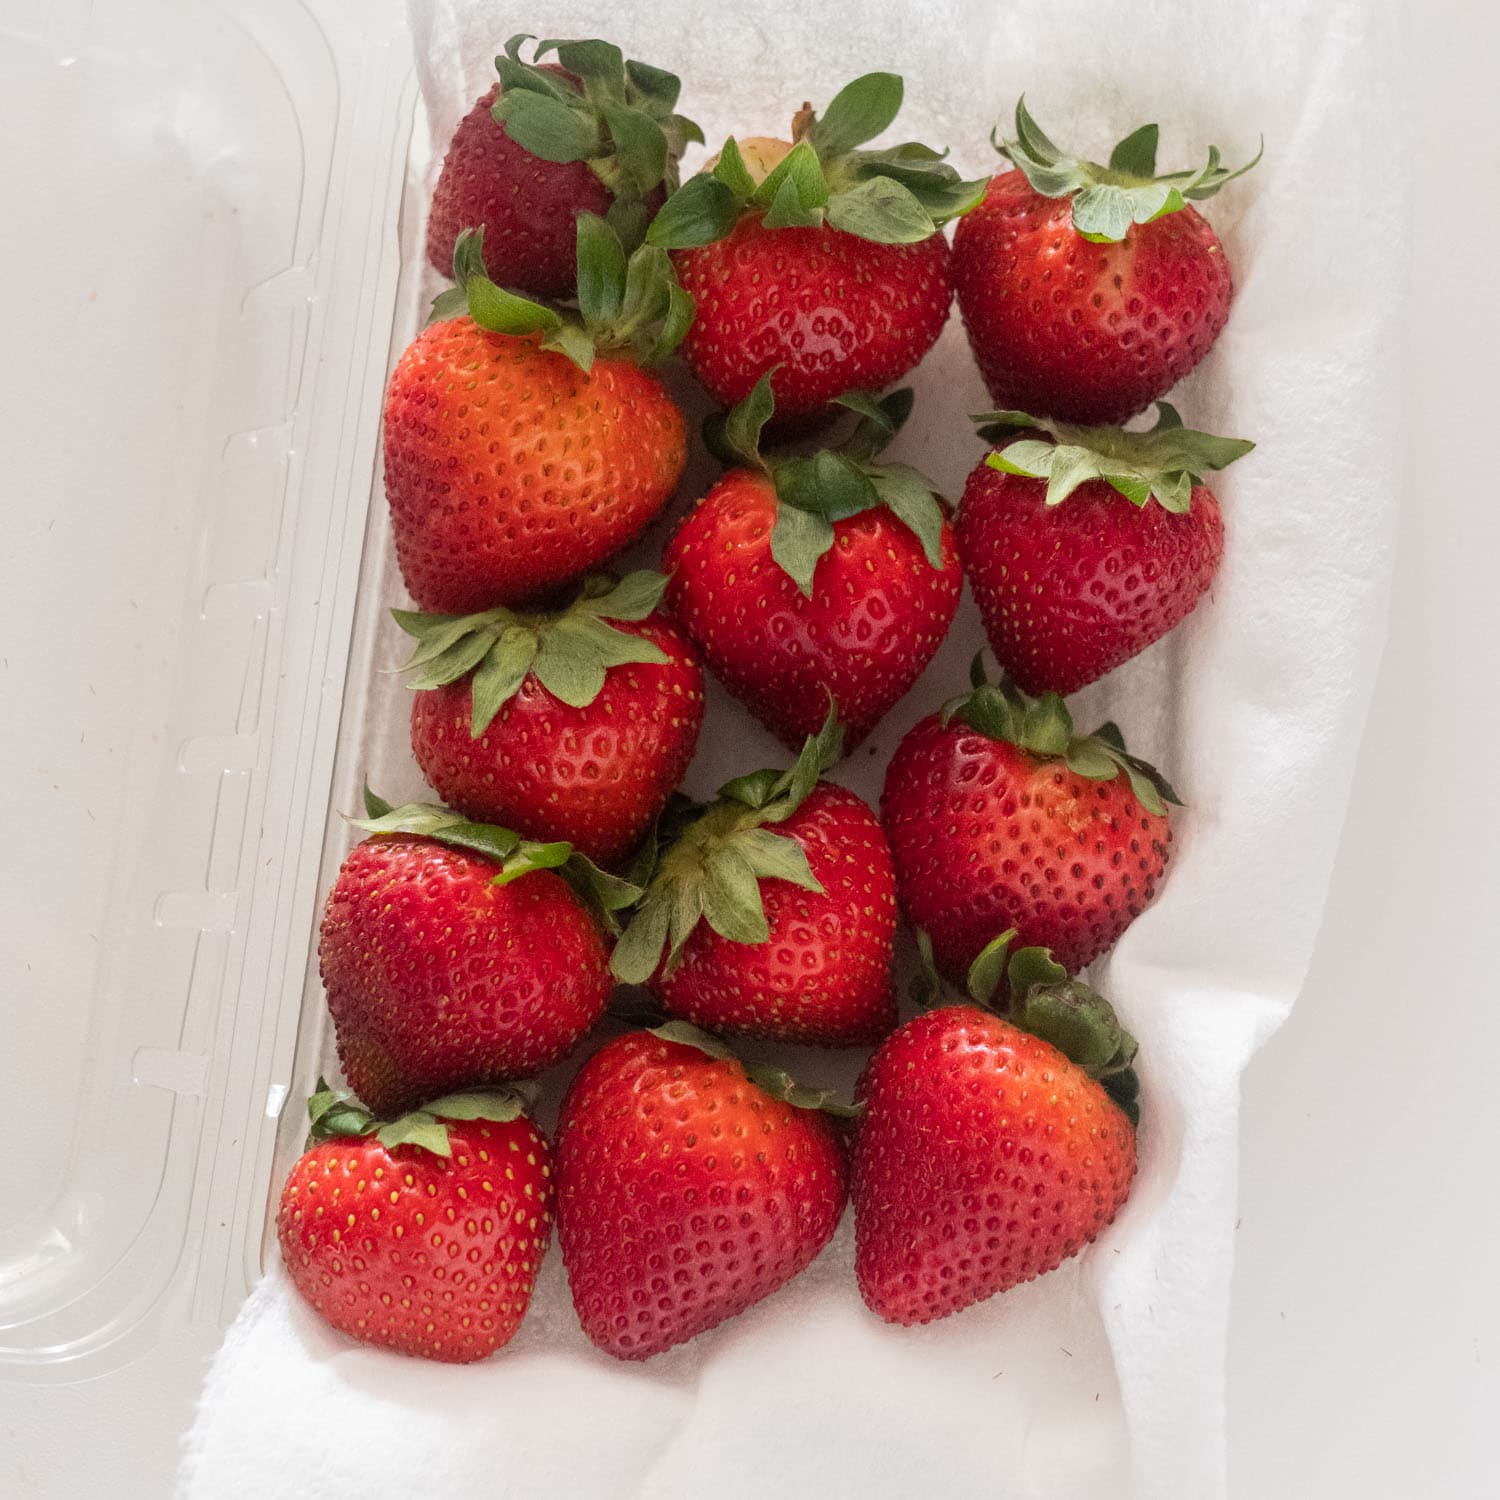 How to Store and Freeze Strawberries